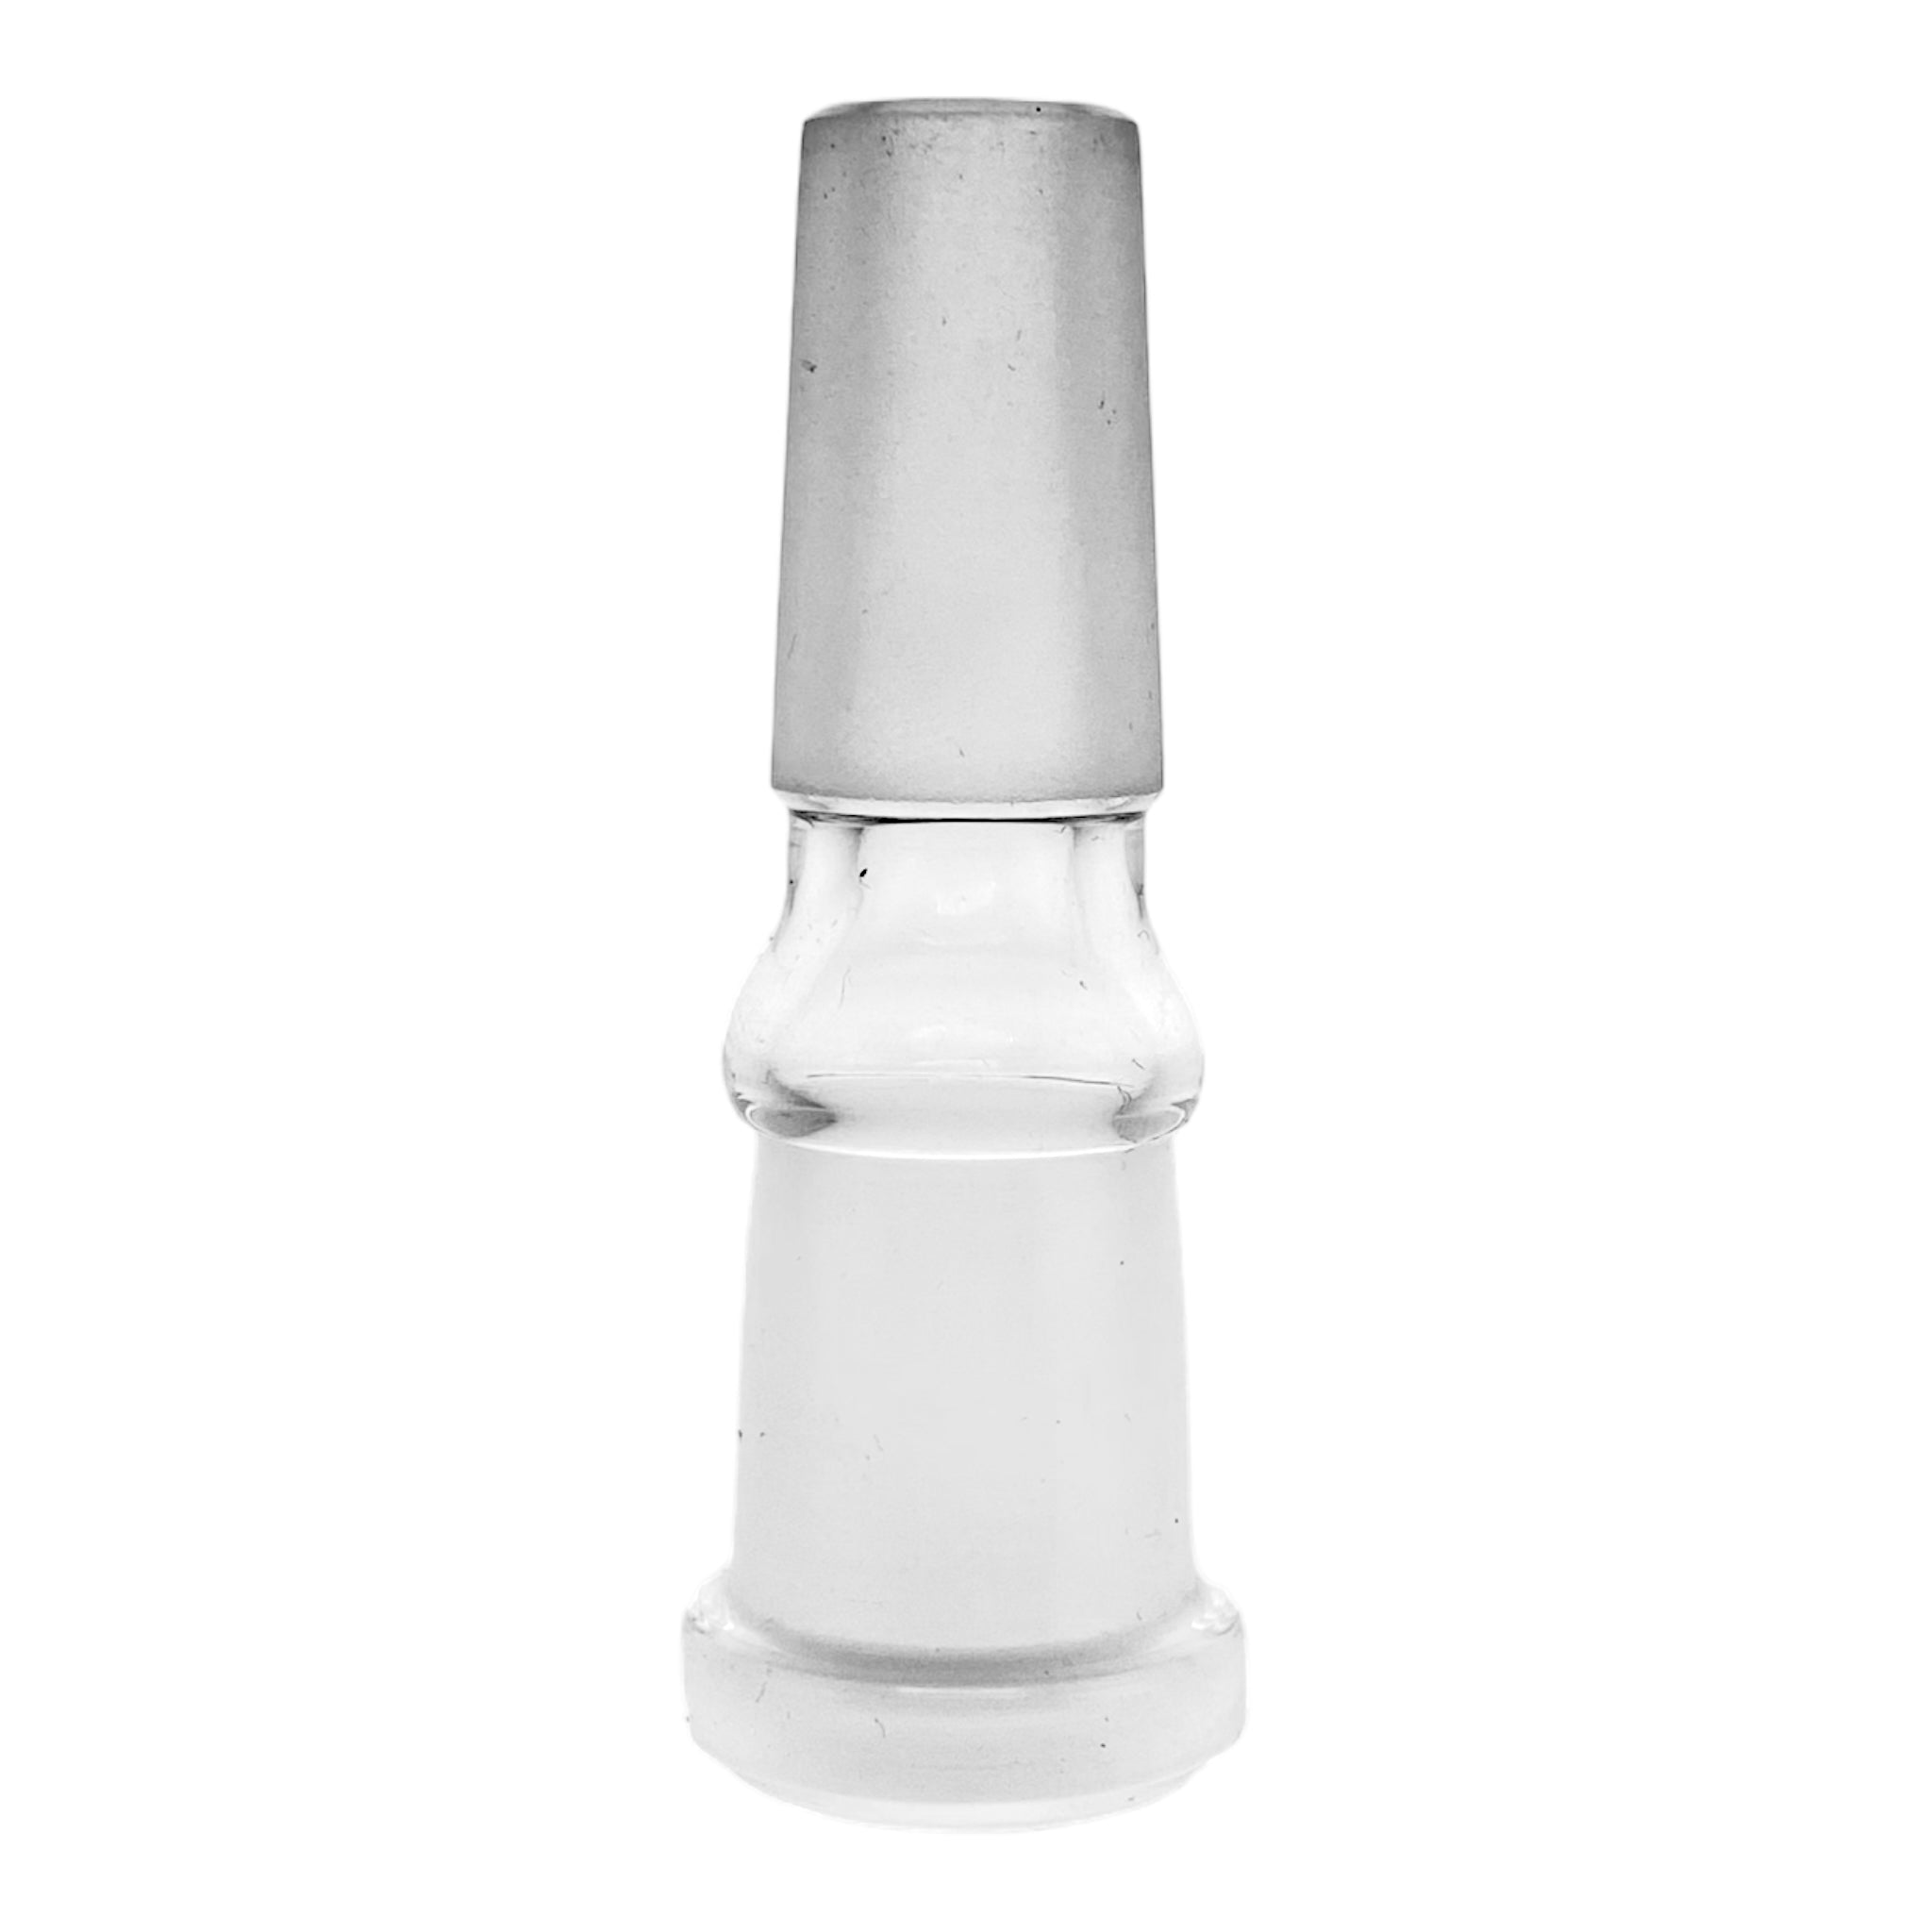 Glass Adapter For Bongs And Dab Rigs - 14mm Female To 14mm Male